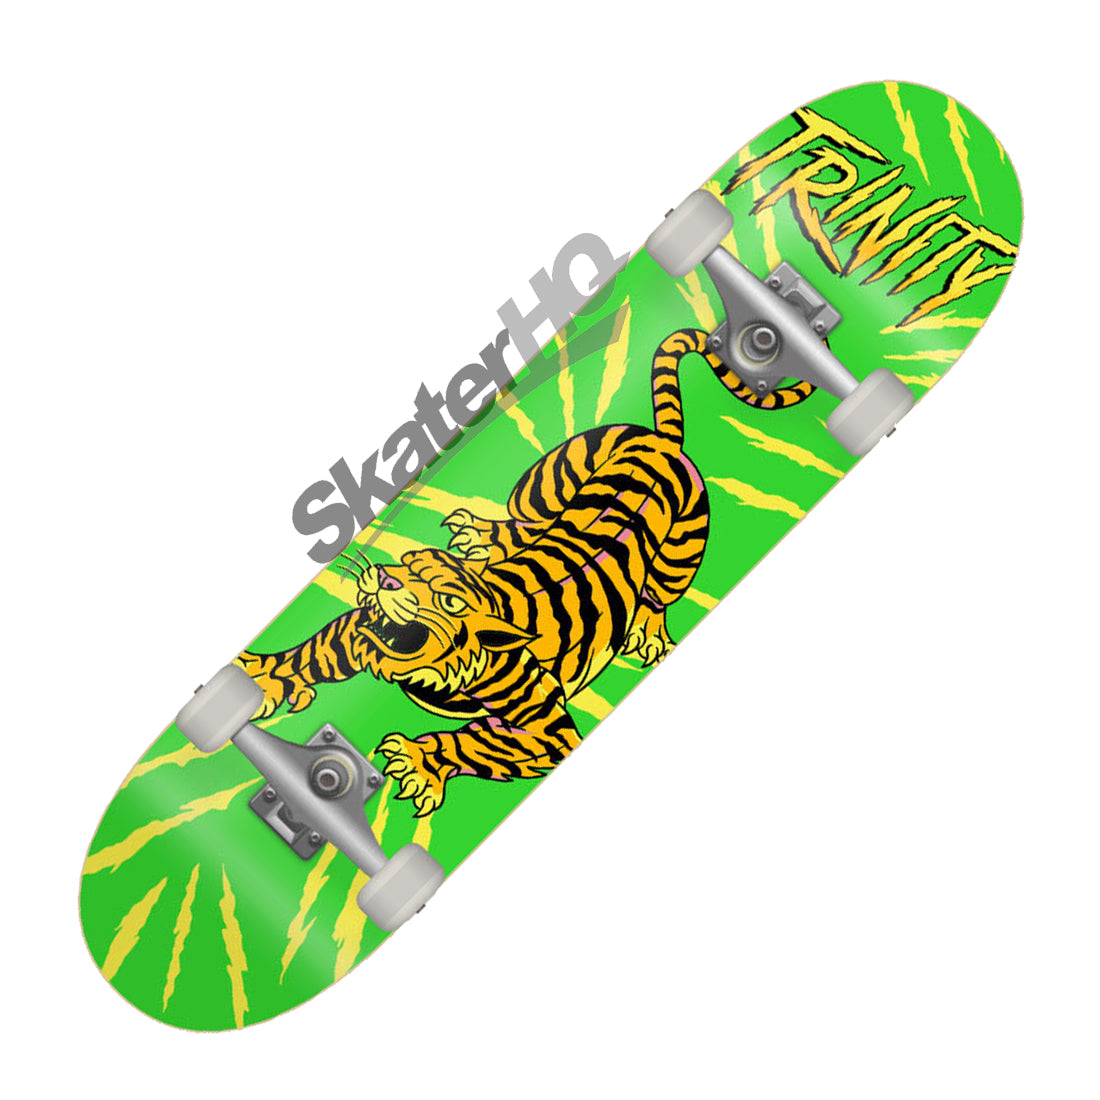 Trinity Tiger 7.75 Complete - Green Skateboard Completes Old School